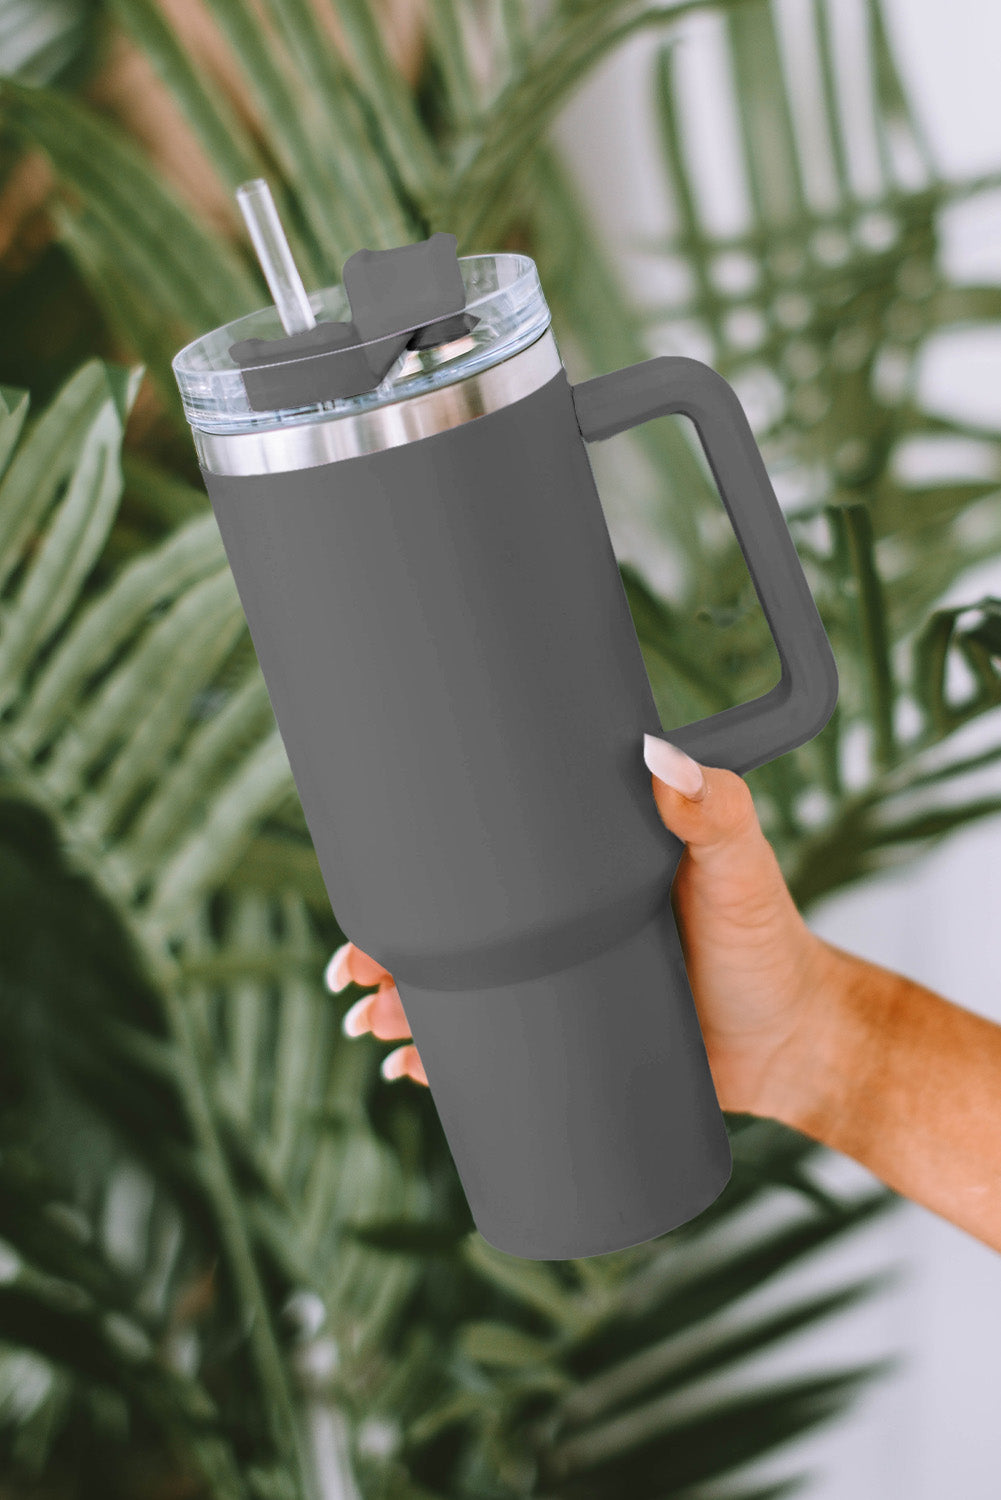 Purple 304 Stainless Steel Insulated Tumbler Mug With Straw